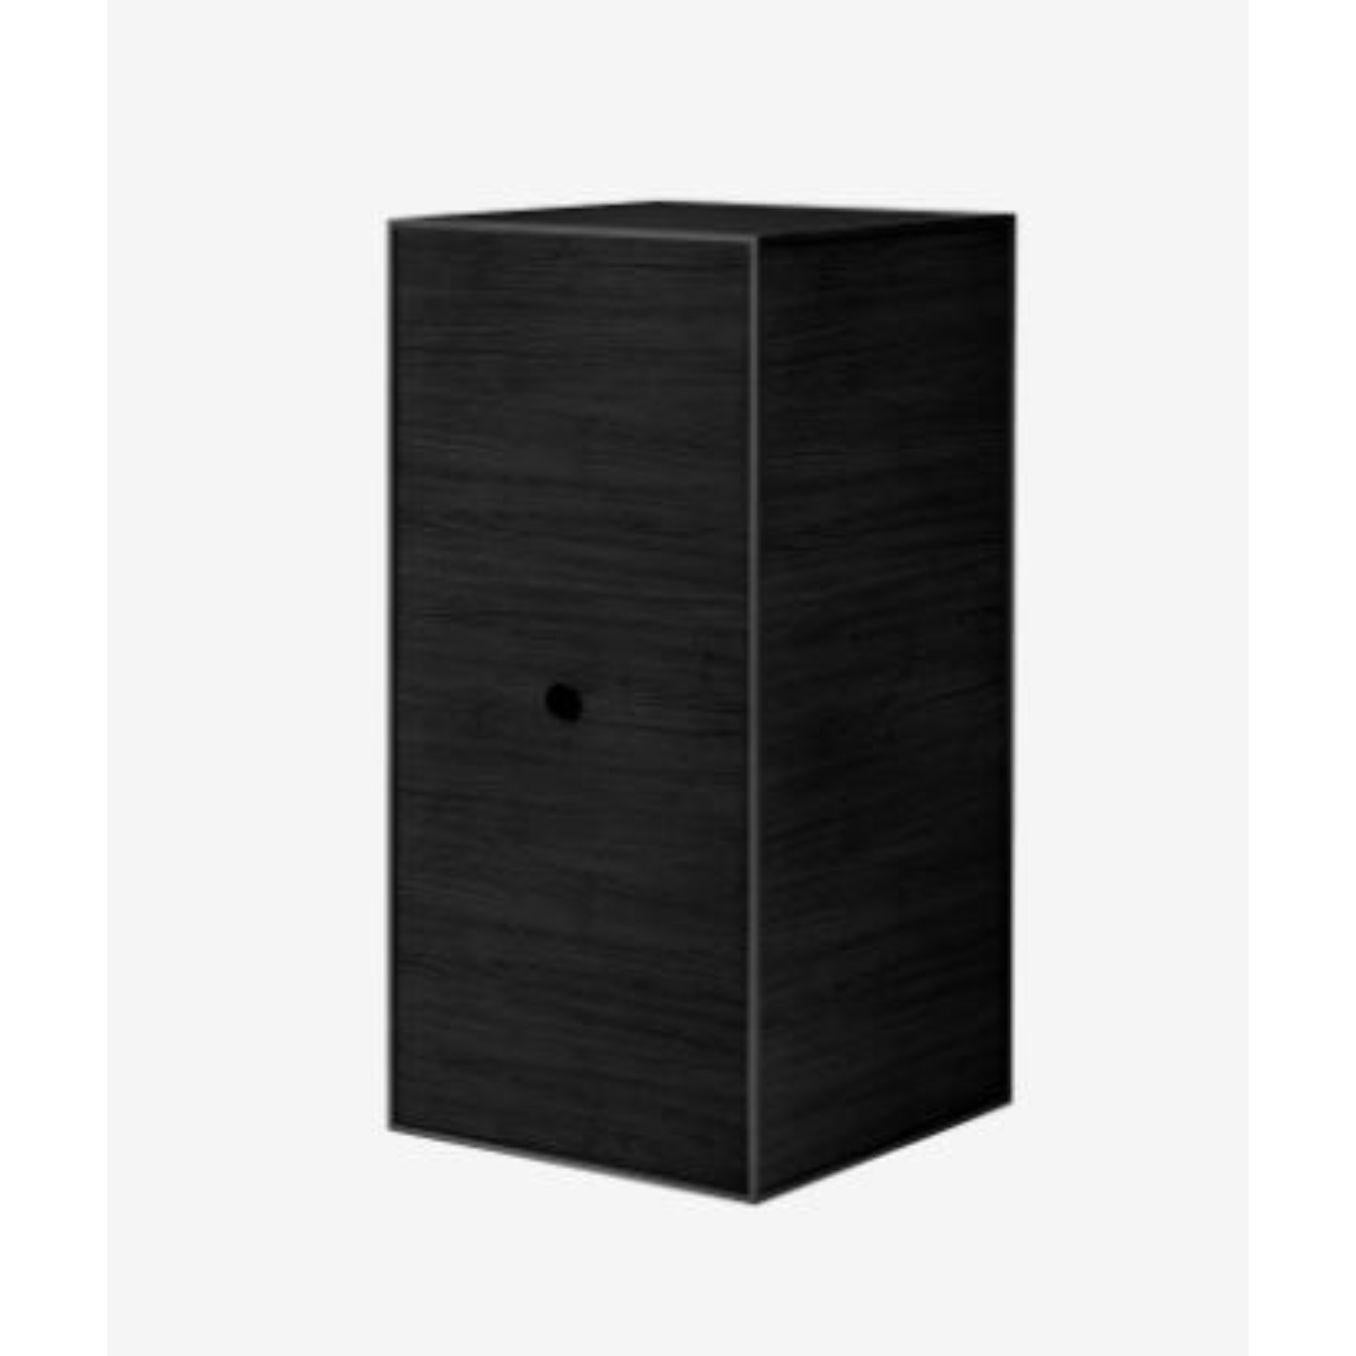 70 black ash frame box with 2 shelves / door by Lassen
Dimensions: d 35 x w 35 x h 70 cm 
Materials: Finér, Melamin, Melamin, Melamine, Metal, Veneer, Ash
Also available in different colors and dimensions. 
Weight: 13 Kg


By Lassen is a